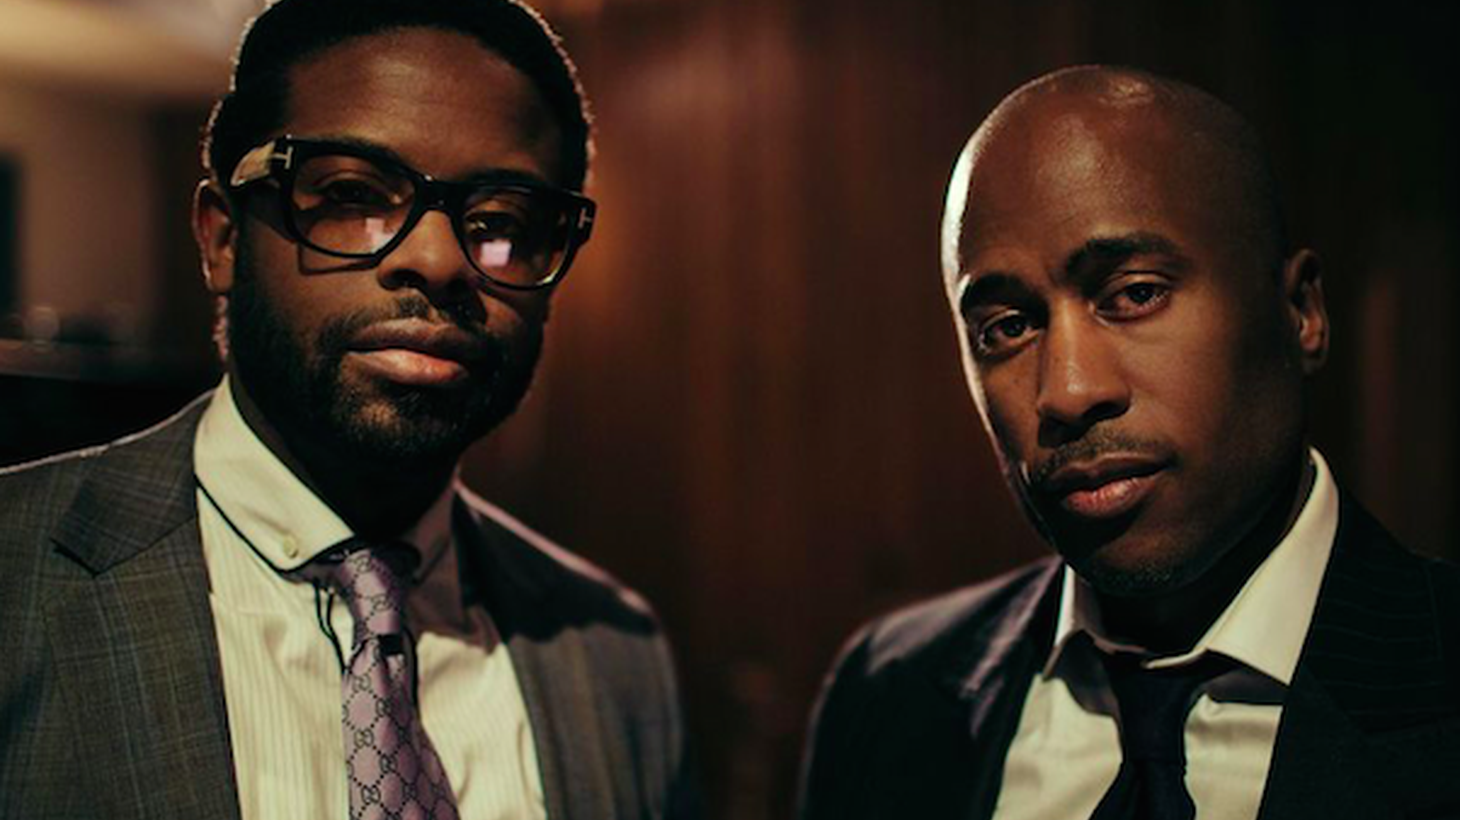 Two of hip-hop's most skilled composers Ali Shaheed Muhammad (of A Tribe Called Quest) and Adrian Younge have partnered as The Midnight Hour.